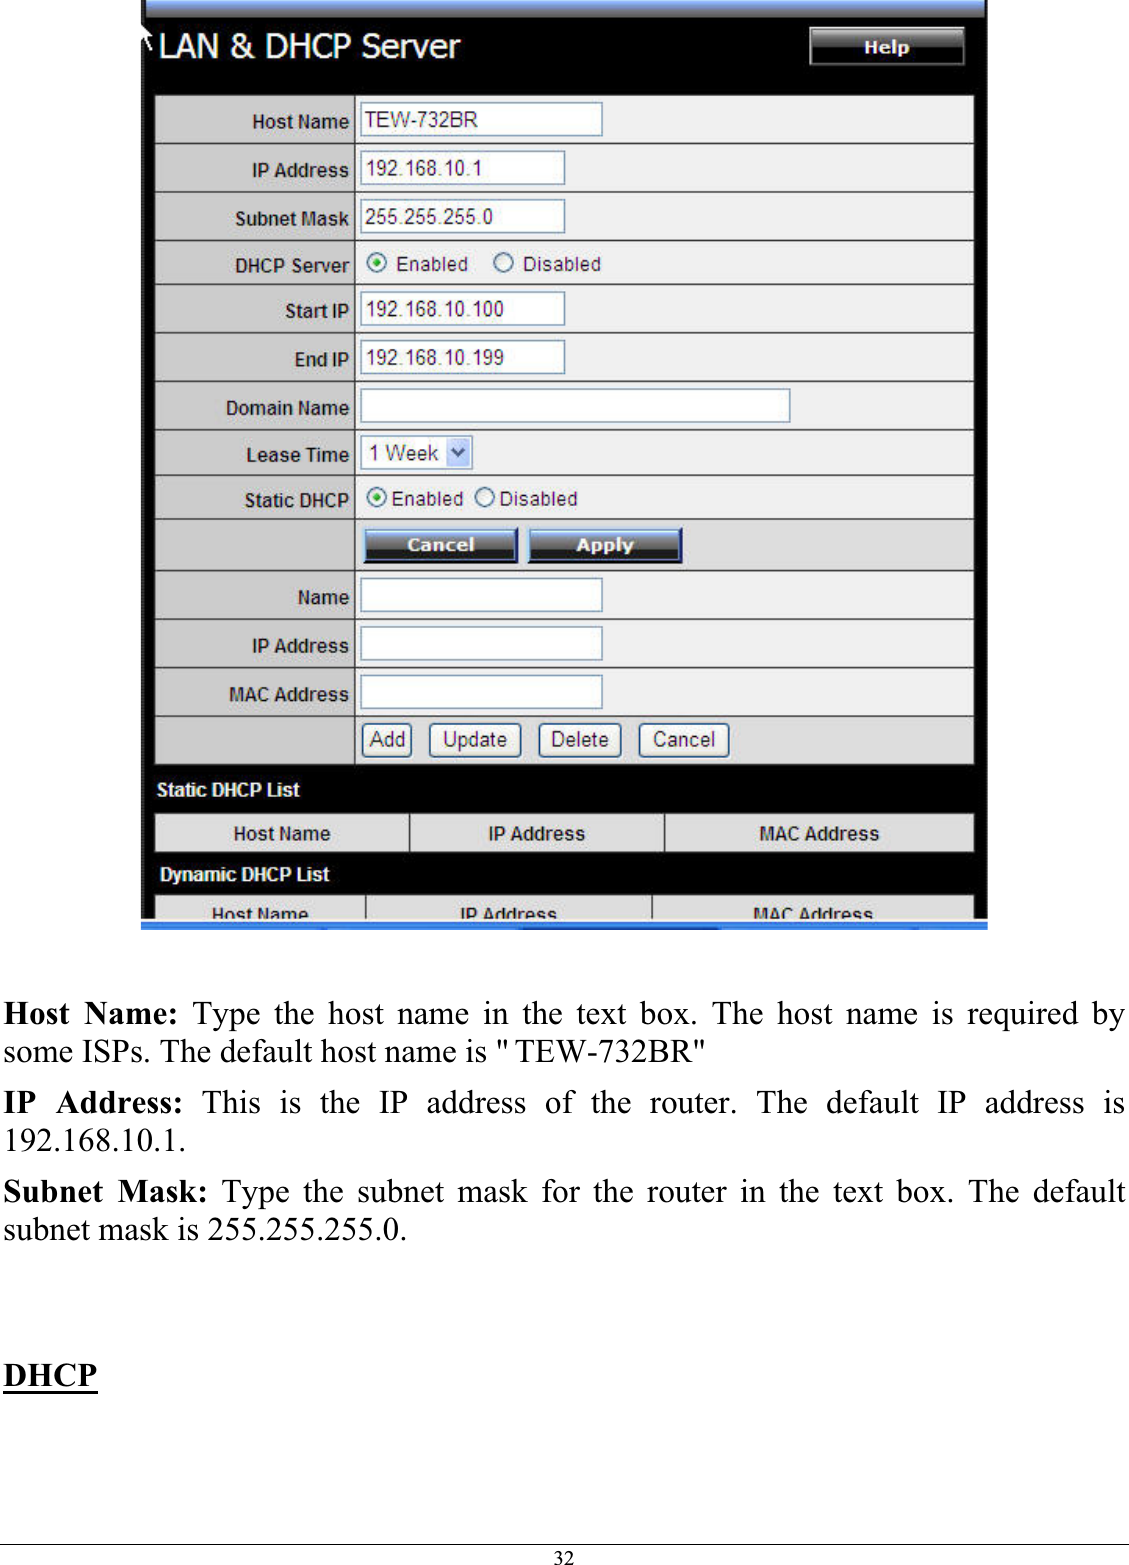 32Host Name: Type the host name in the text box. The host name is required by some ISPs. The default host name is &quot; TEW-732BR&quot;IP Address: This is the IP address of the router. The default IP address is 192.168.10.1.Subnet Mask: Type the subnet mask for the router in the text box. The default subnet mask is 255.255.255.0. DHCP